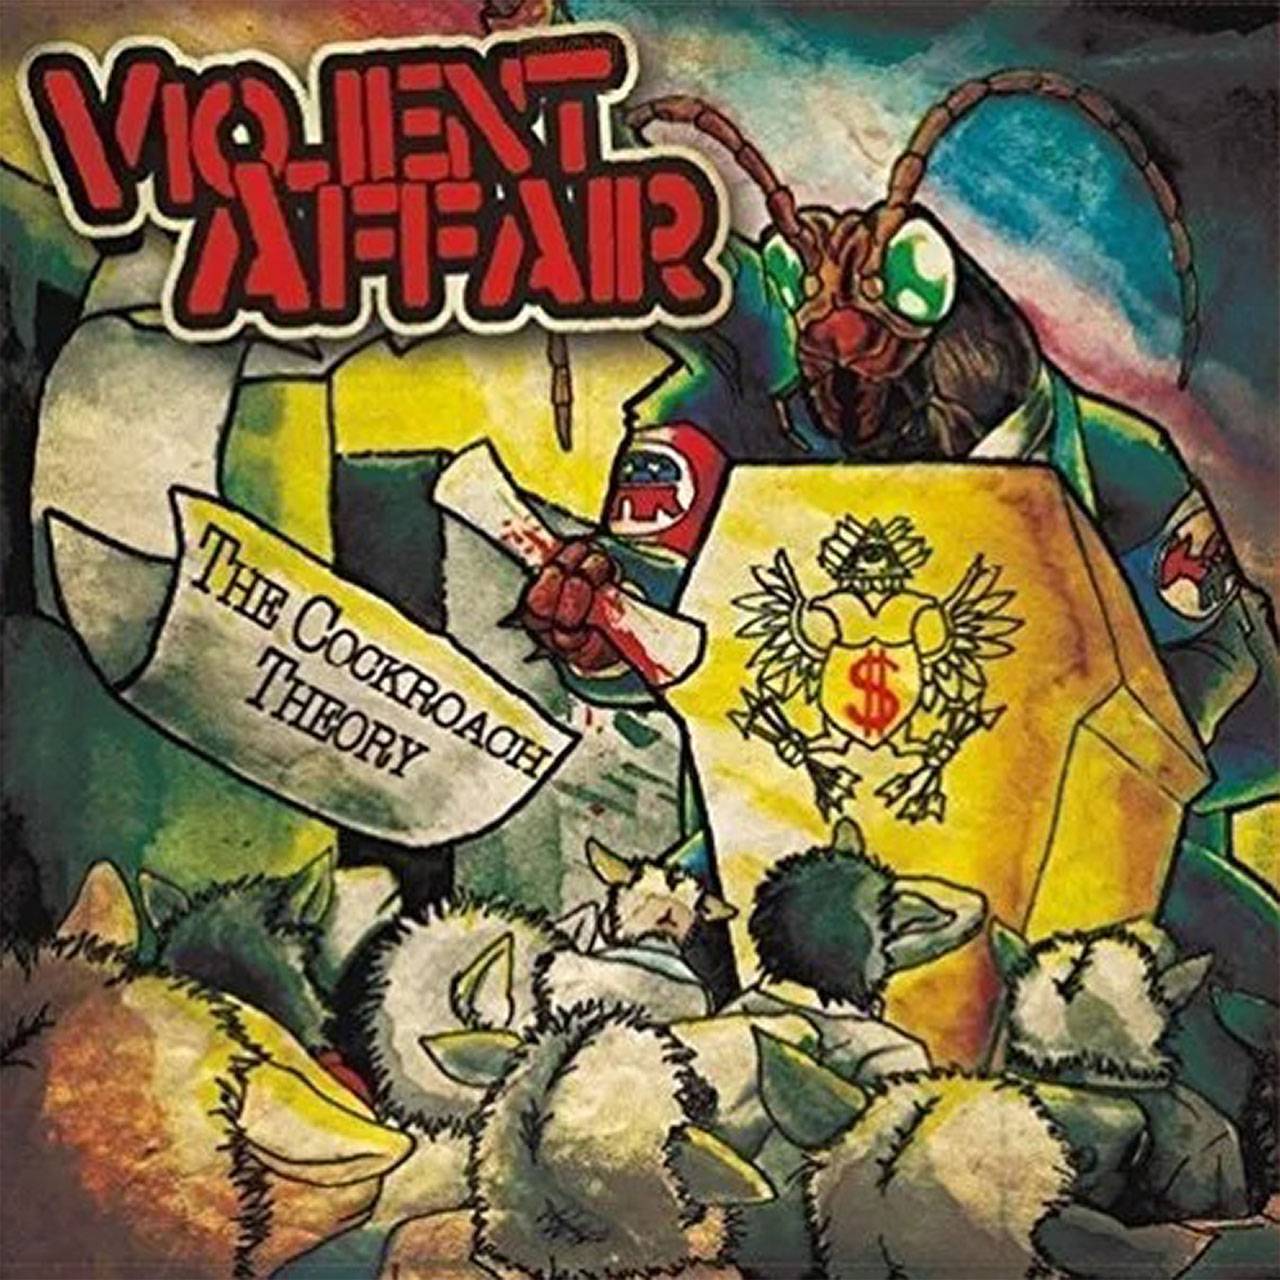 Violent Affair - The Cockroach Theory